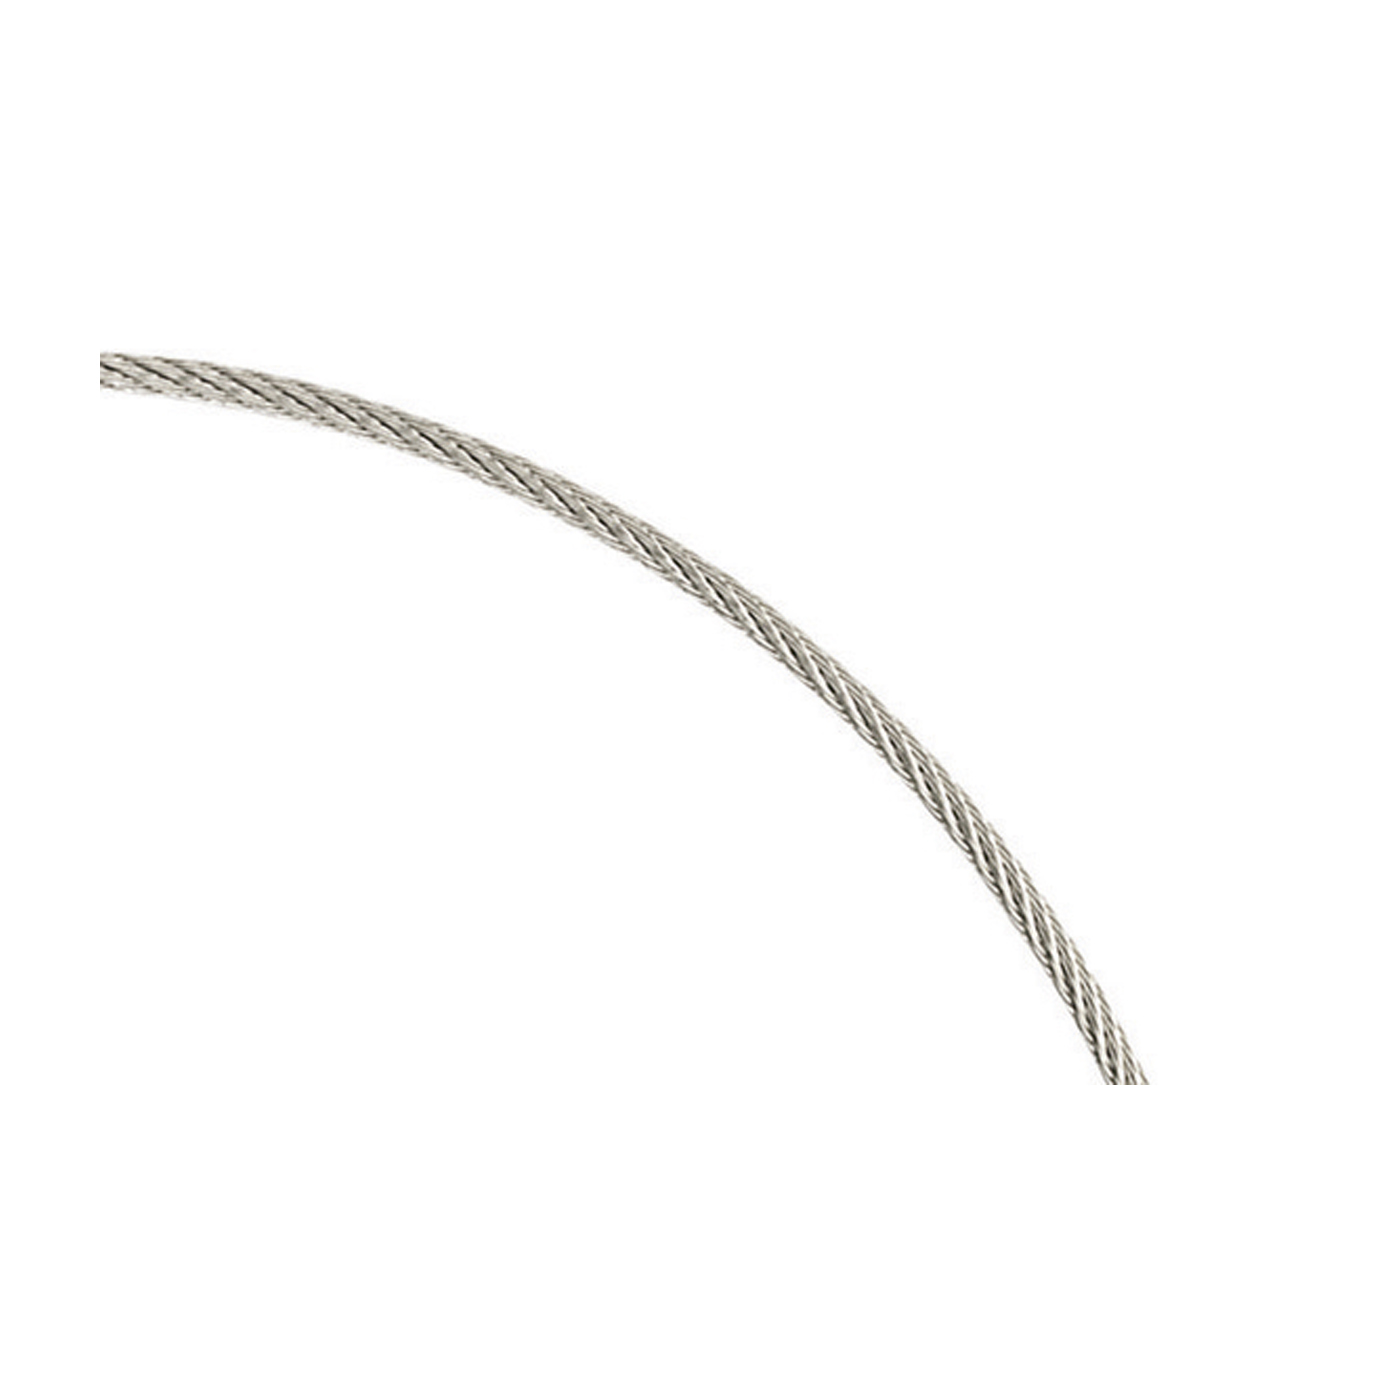 Steel Cable Neck Wire, ø 0.72 mm, 45 cm - 1 piece